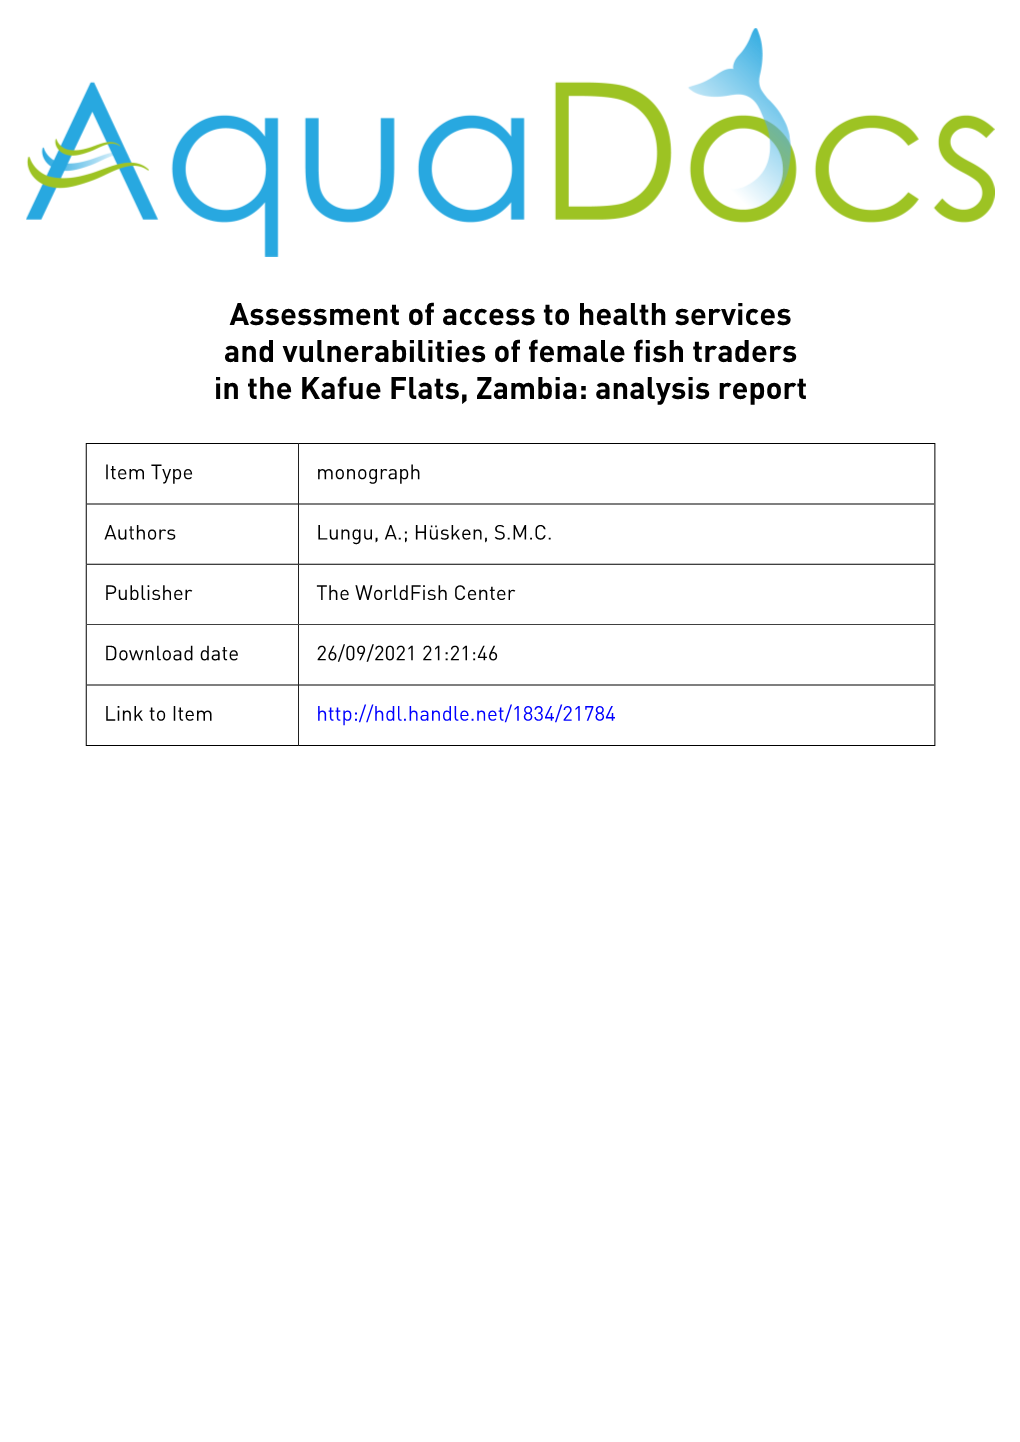 Assessment of Access to Health Services and Vulnerabilities of Female Fish Traders in the Kafue Flats, Zambia: Analysis Report